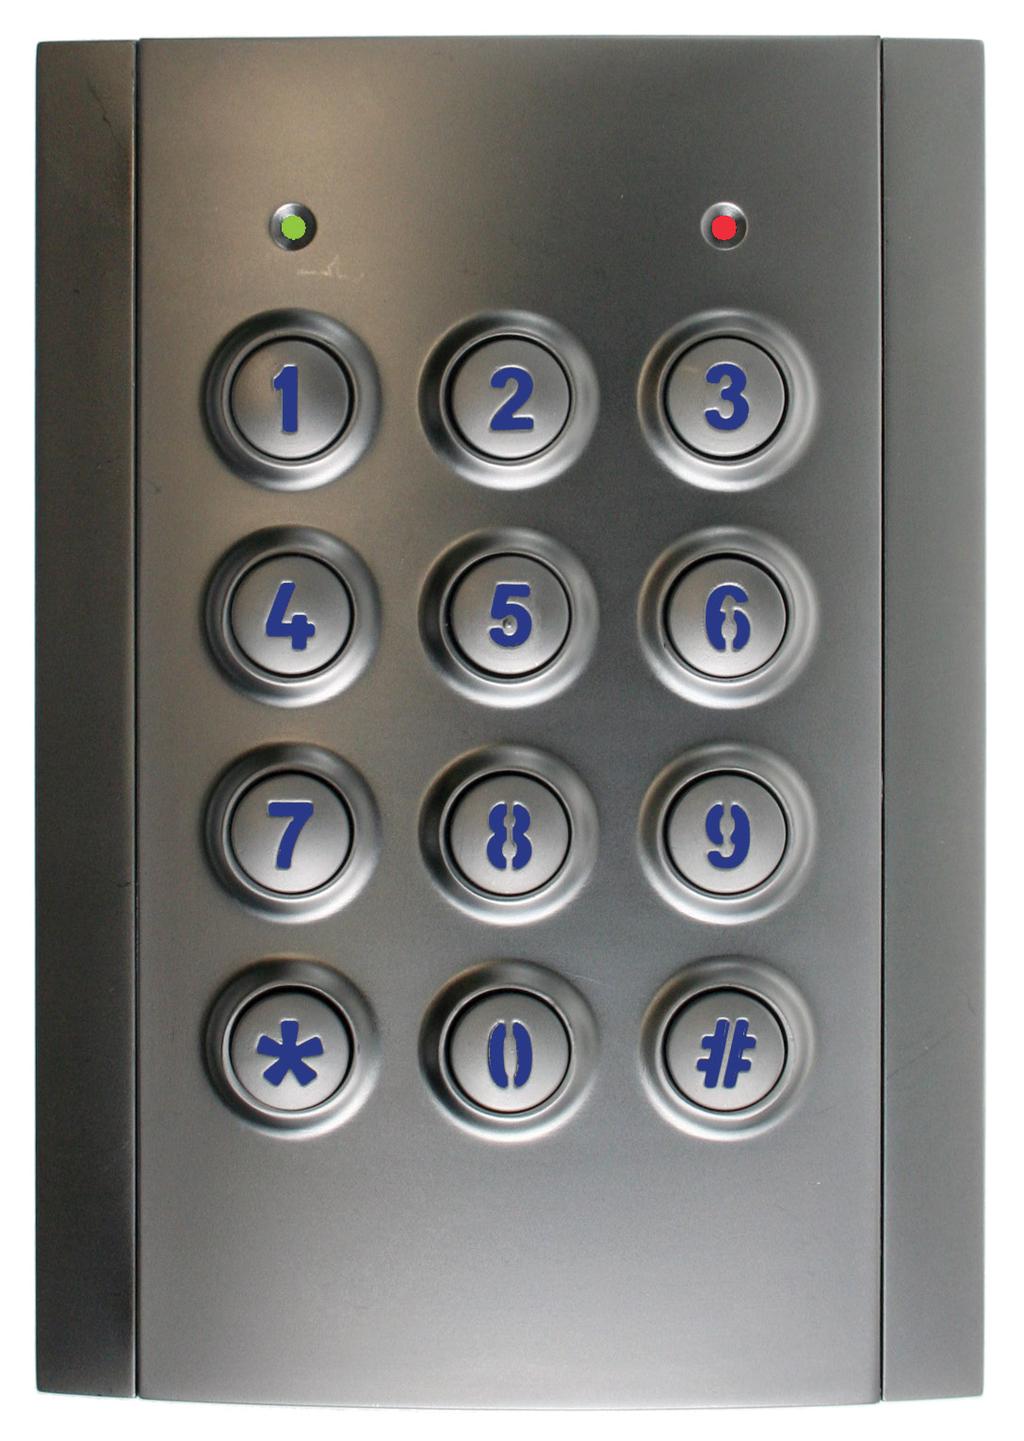 CP150B - Vandal & Weather Resistant Keypad The CP150B keypad provides alarm and or access control functionality when used on selected Solution security control panels.